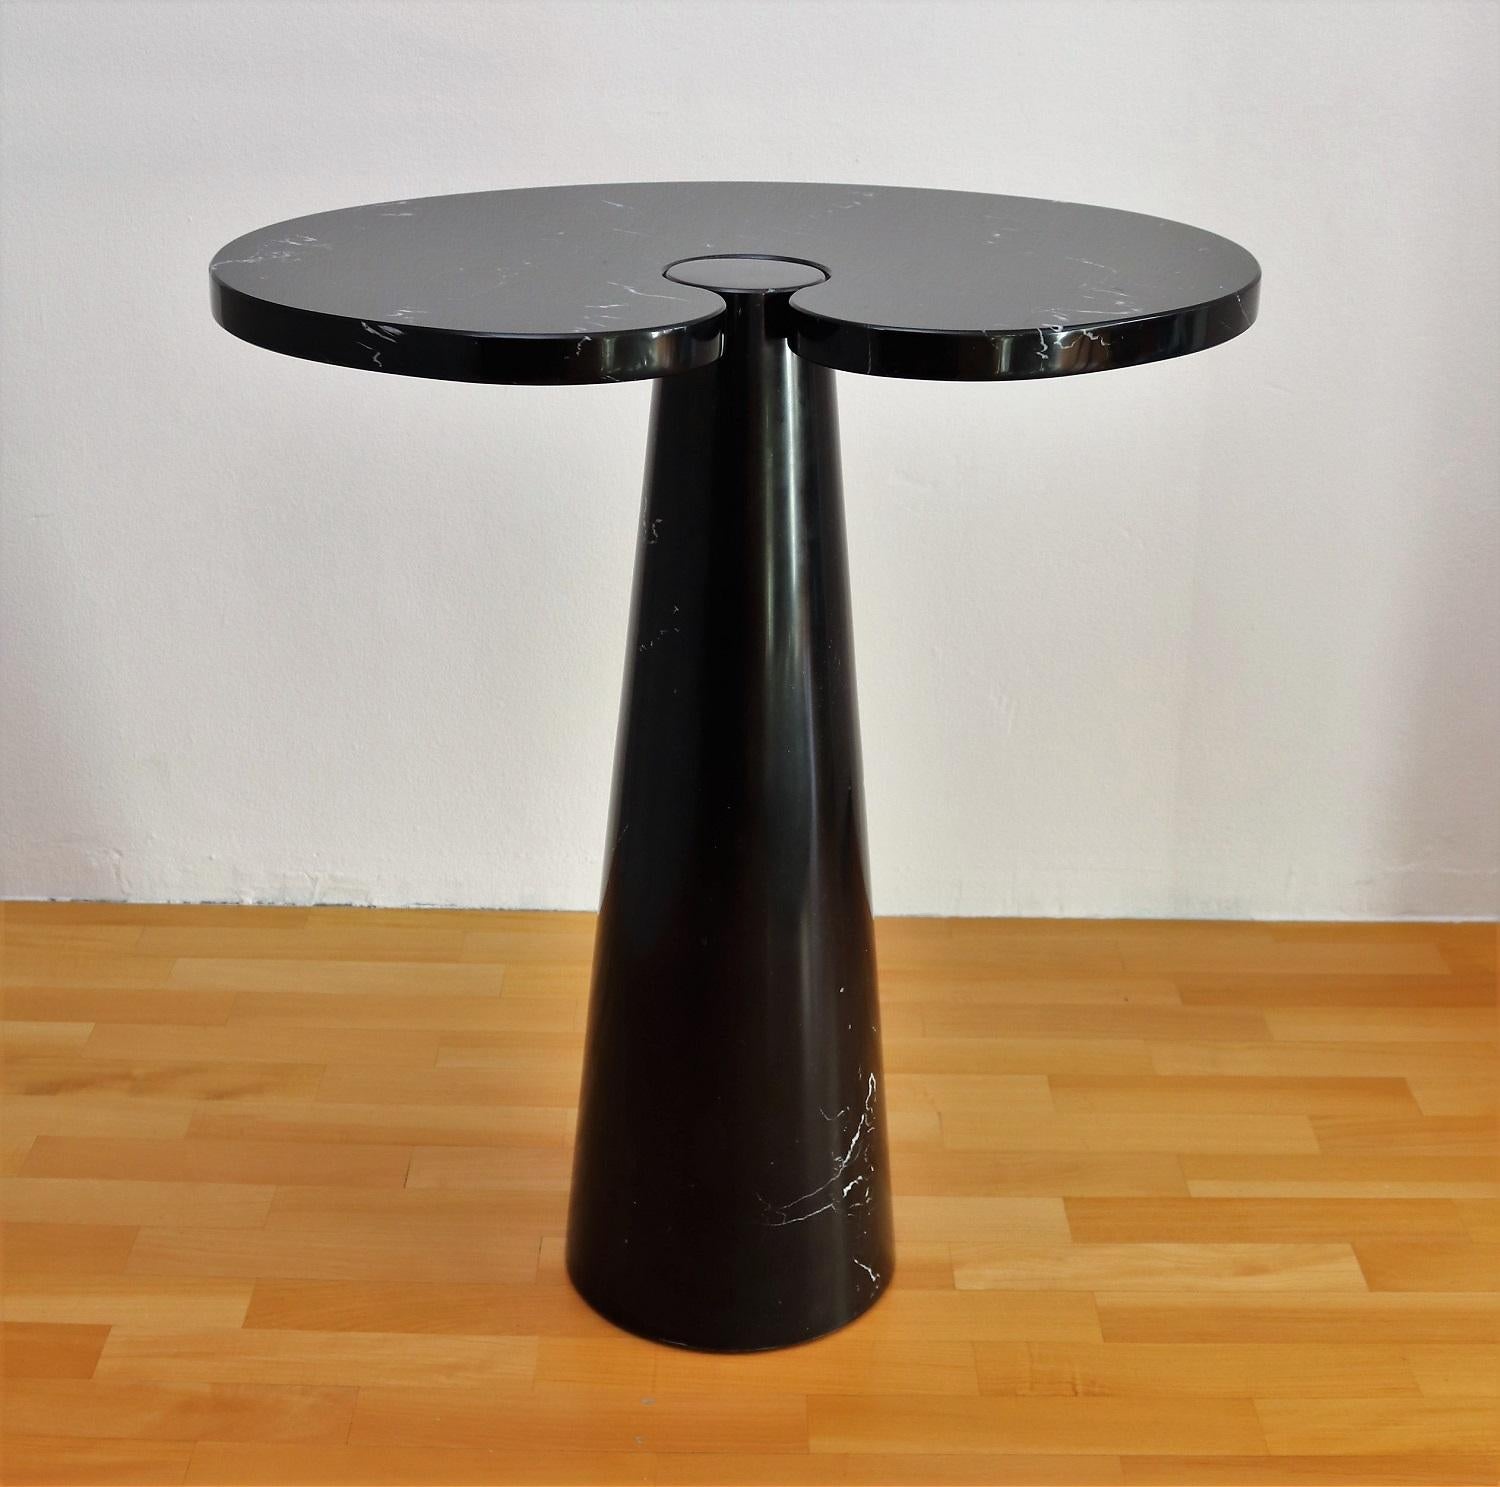 Beautiful high vintage side table handcrafted of black marquina marble for Skipper.
Design in the 1970s by Italian Angelo Mangiarotti.
The table consists of two heavy marble pieces, which are only conically inserted into the correct position